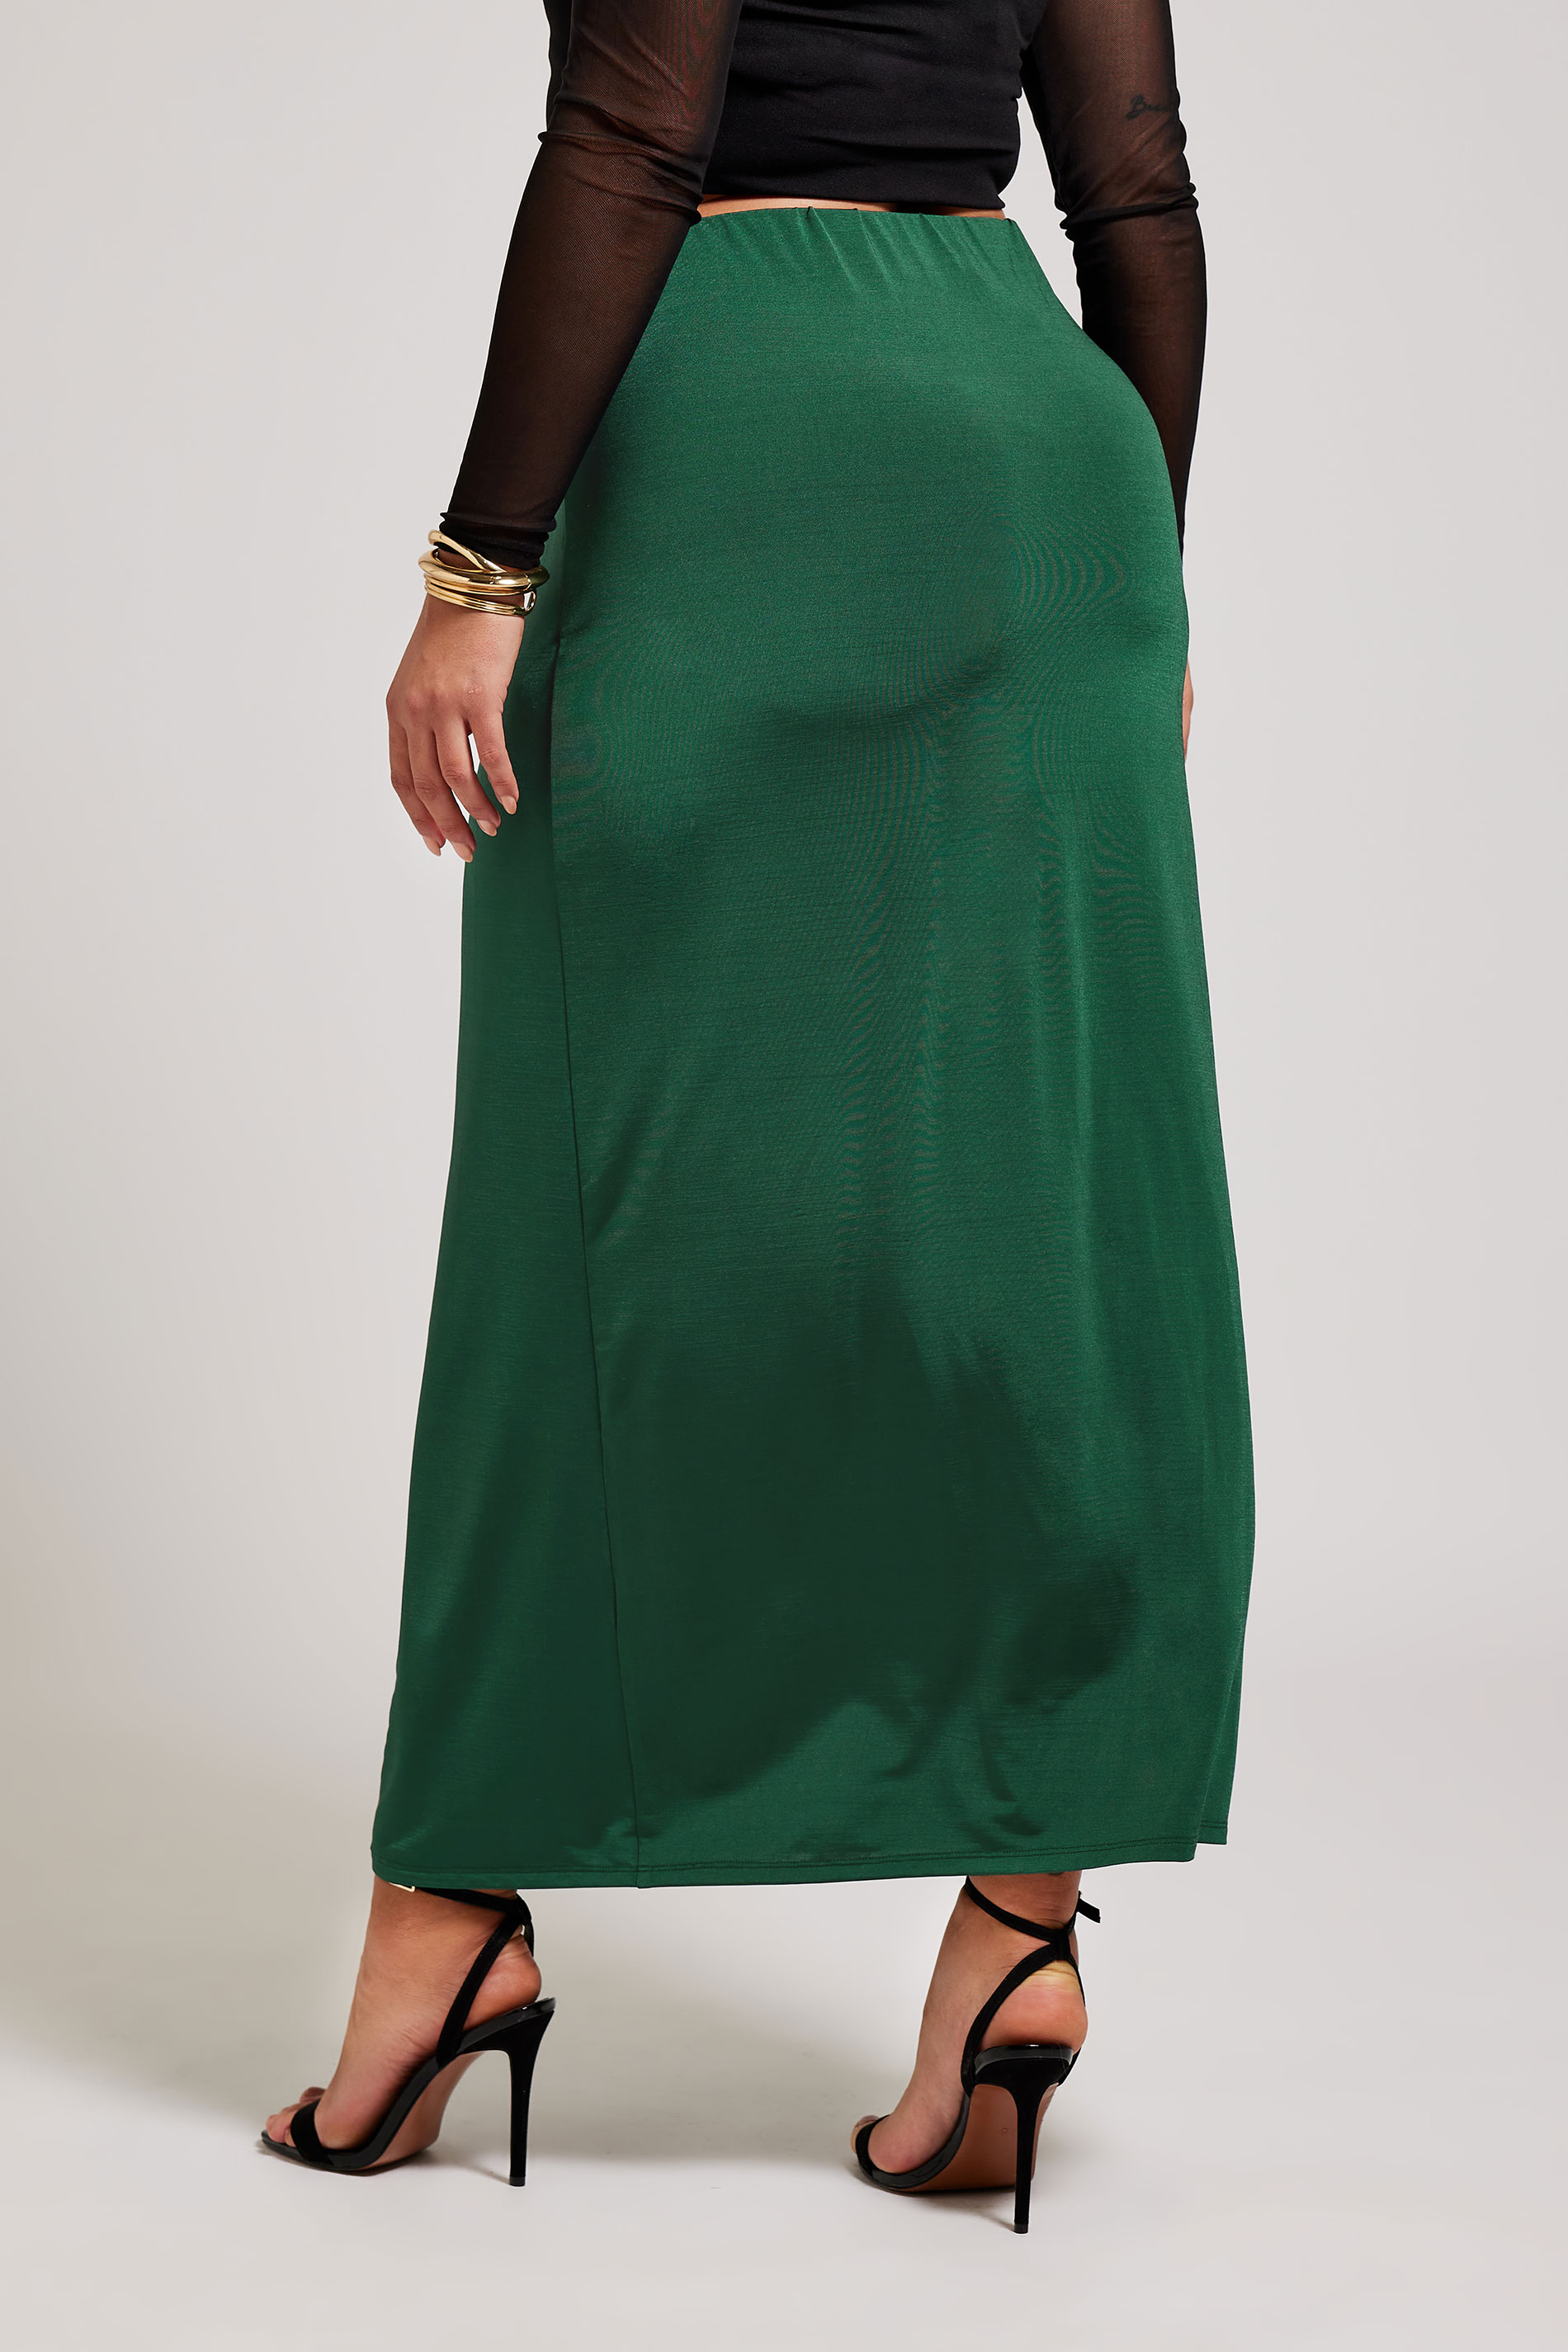 YOURS LONDON Plus Size Emerald Green Slinky Maxi Skirt | Yours Clothing 3